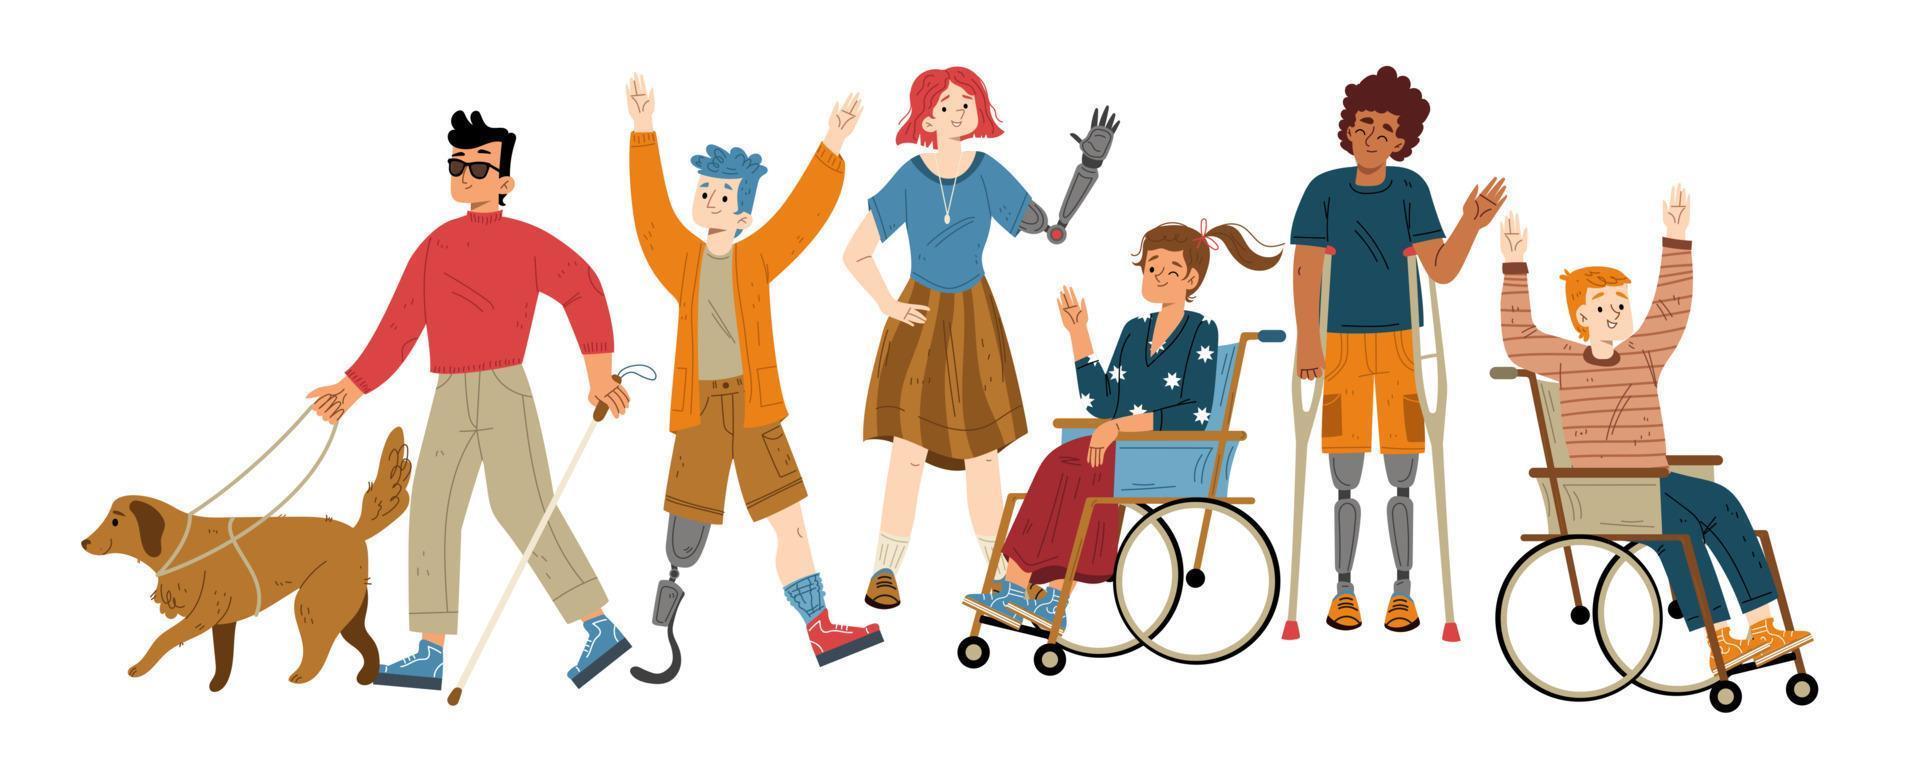 People with different disabilities waving hand vector